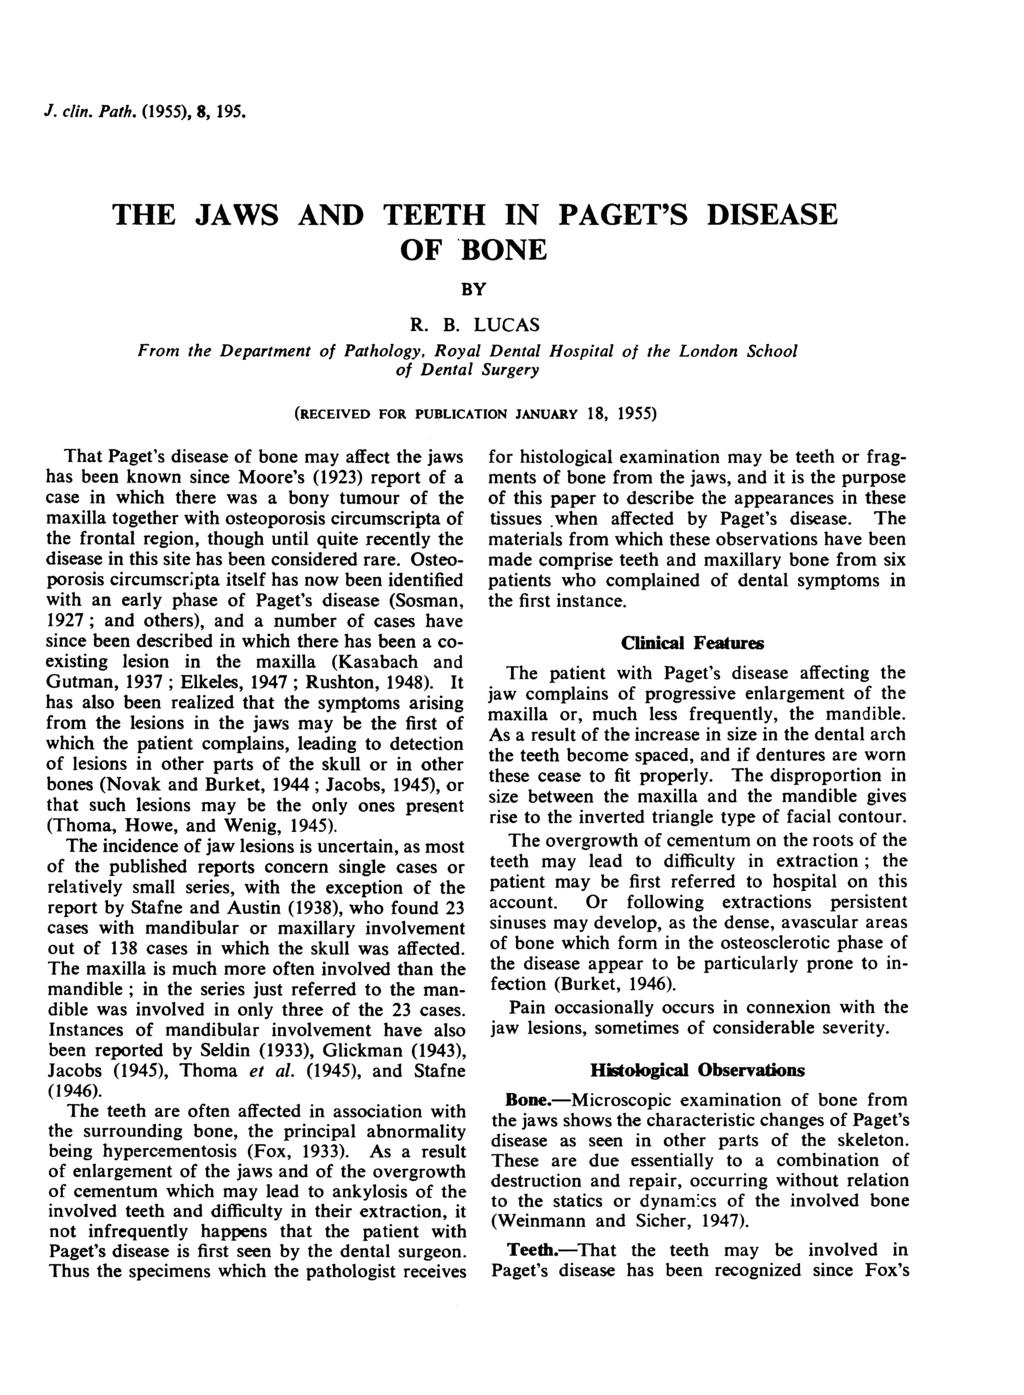 J. clin. Path. (1955), 8, 195. THE JAWS AND TEETH IN PAGET'S DISEASE OF BO